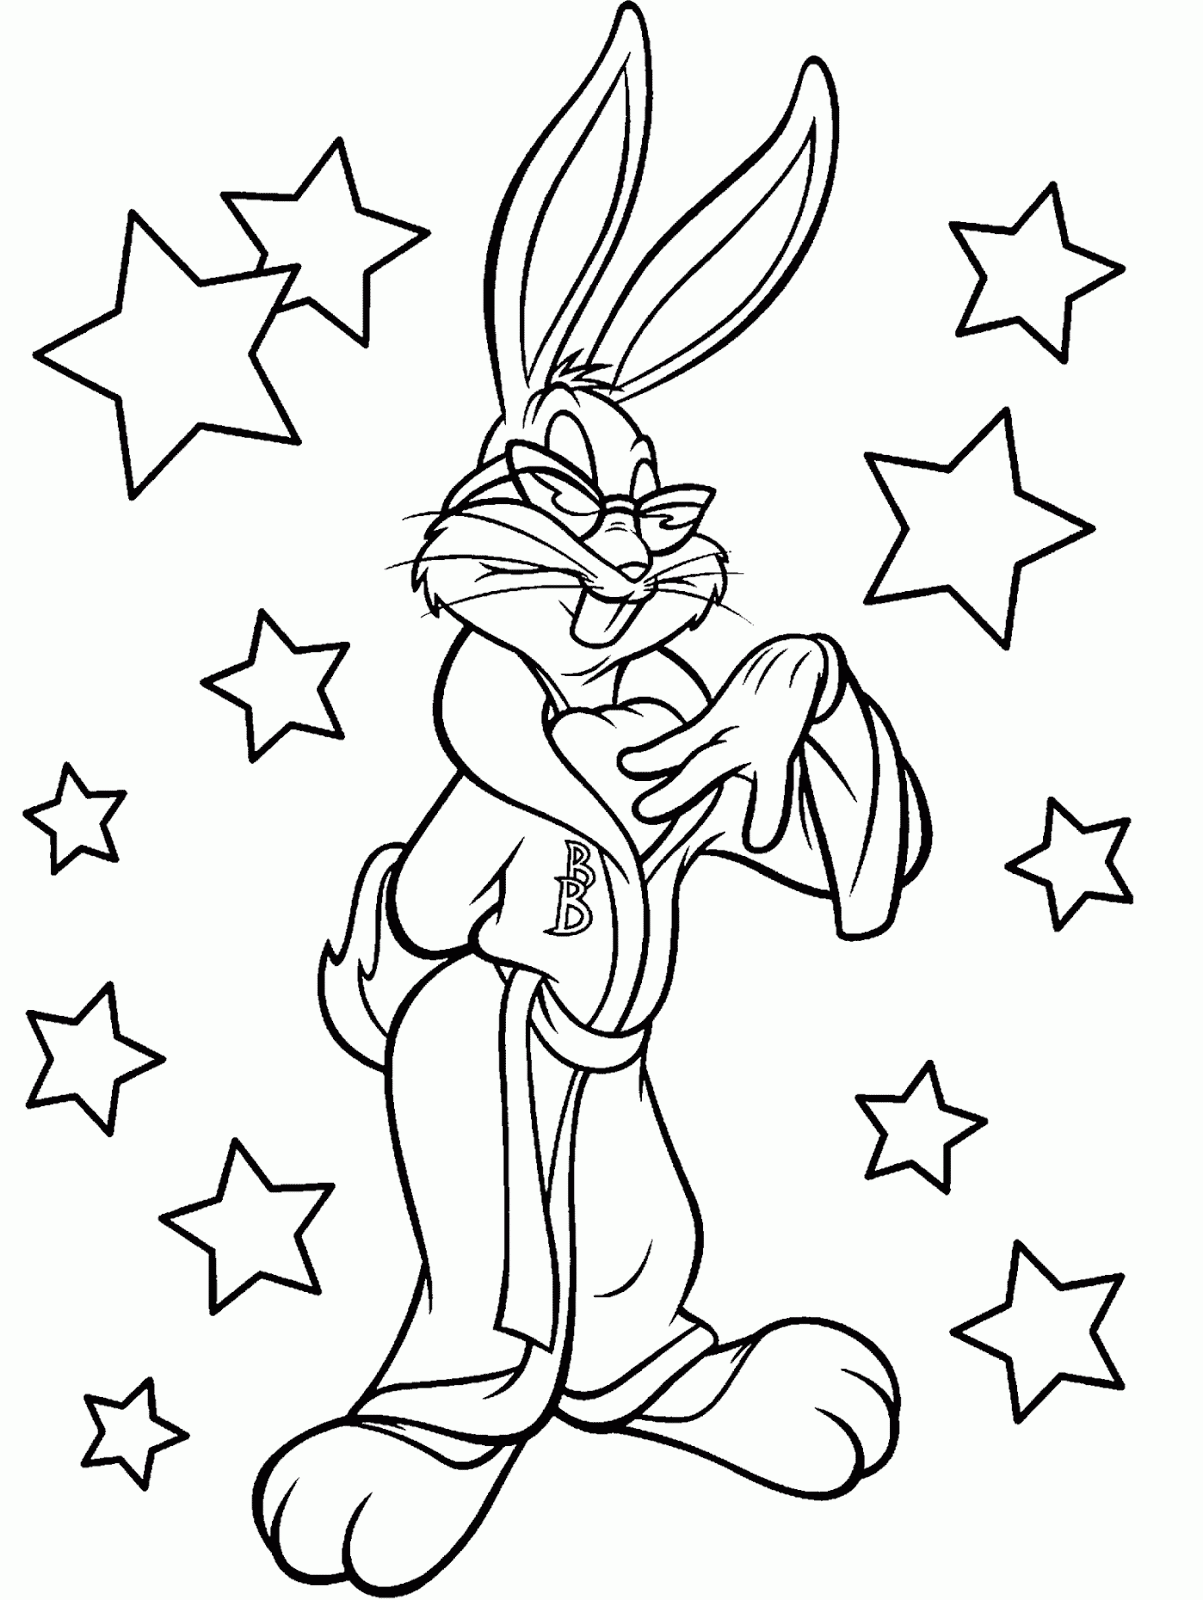 walt disney coloring pages to print - photo #20